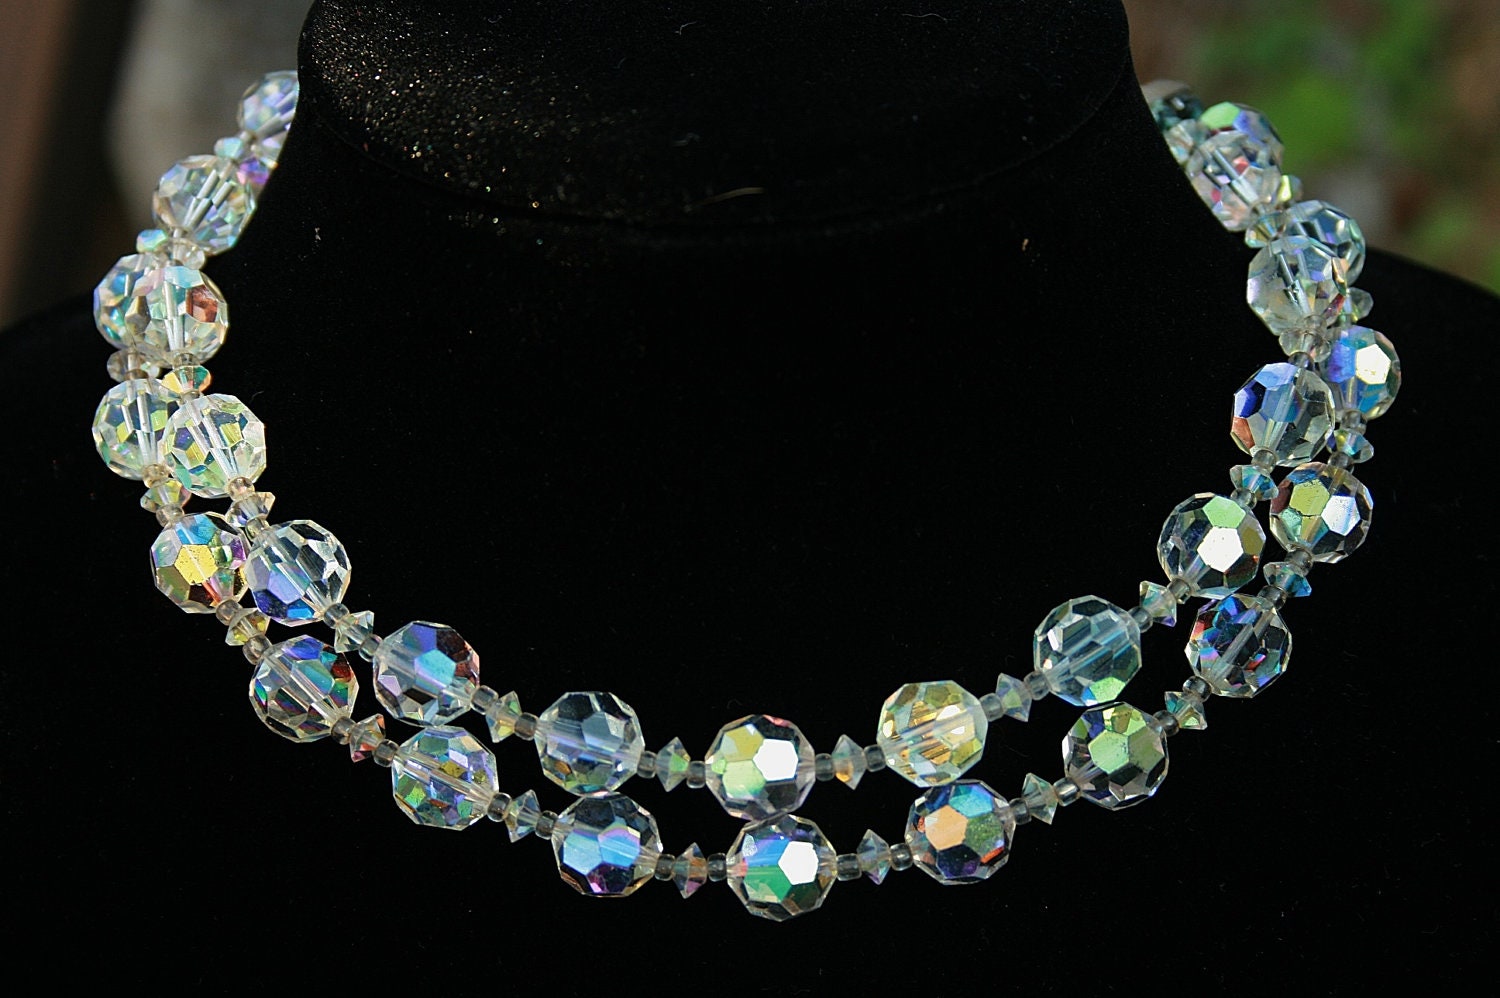 Vintage Crystal Necklace-2 Strands-Aurora by AuntBeasBling on Etsy